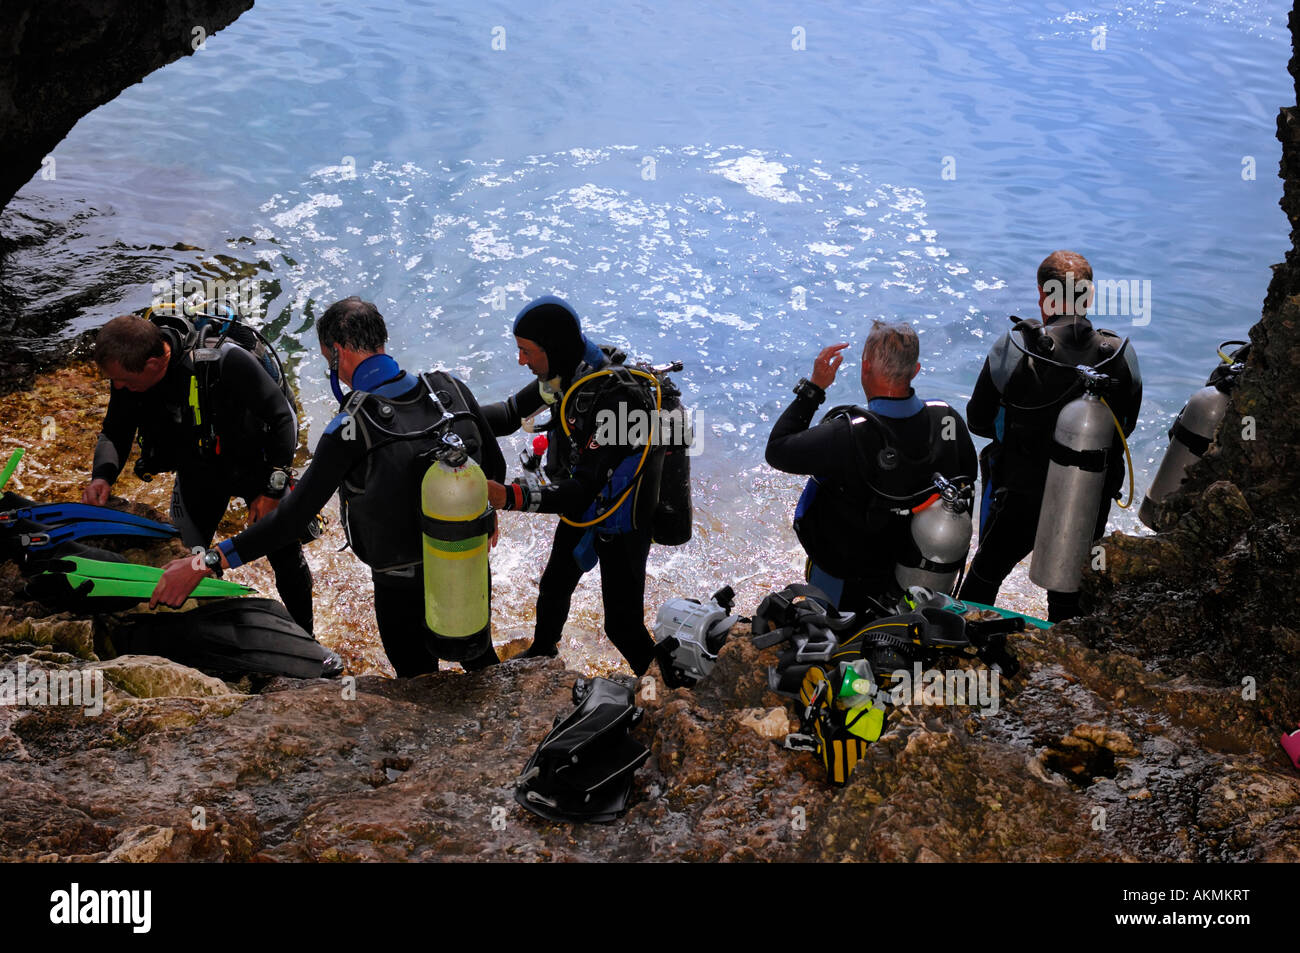 Group of divers at a cavern preparing to dip into the sea water Stock Photo